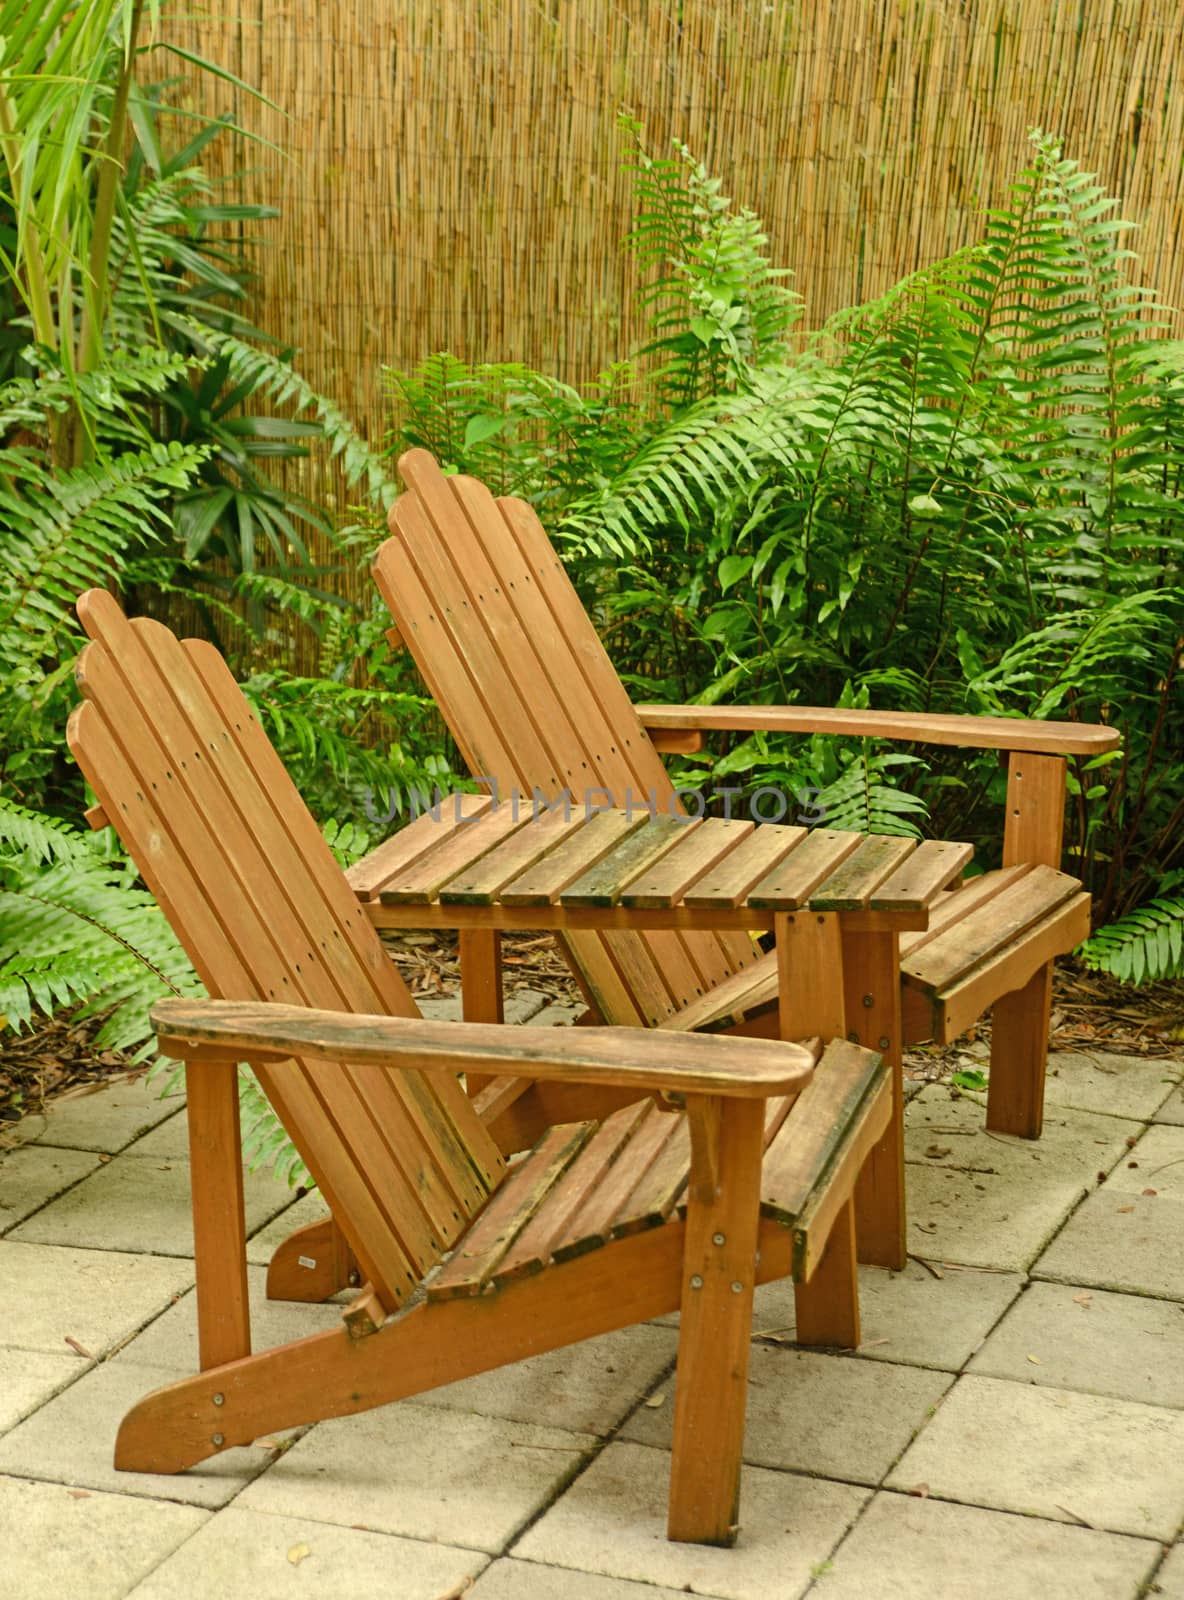 wooden Adirondack chairs in tropical backyard in summer on patio
